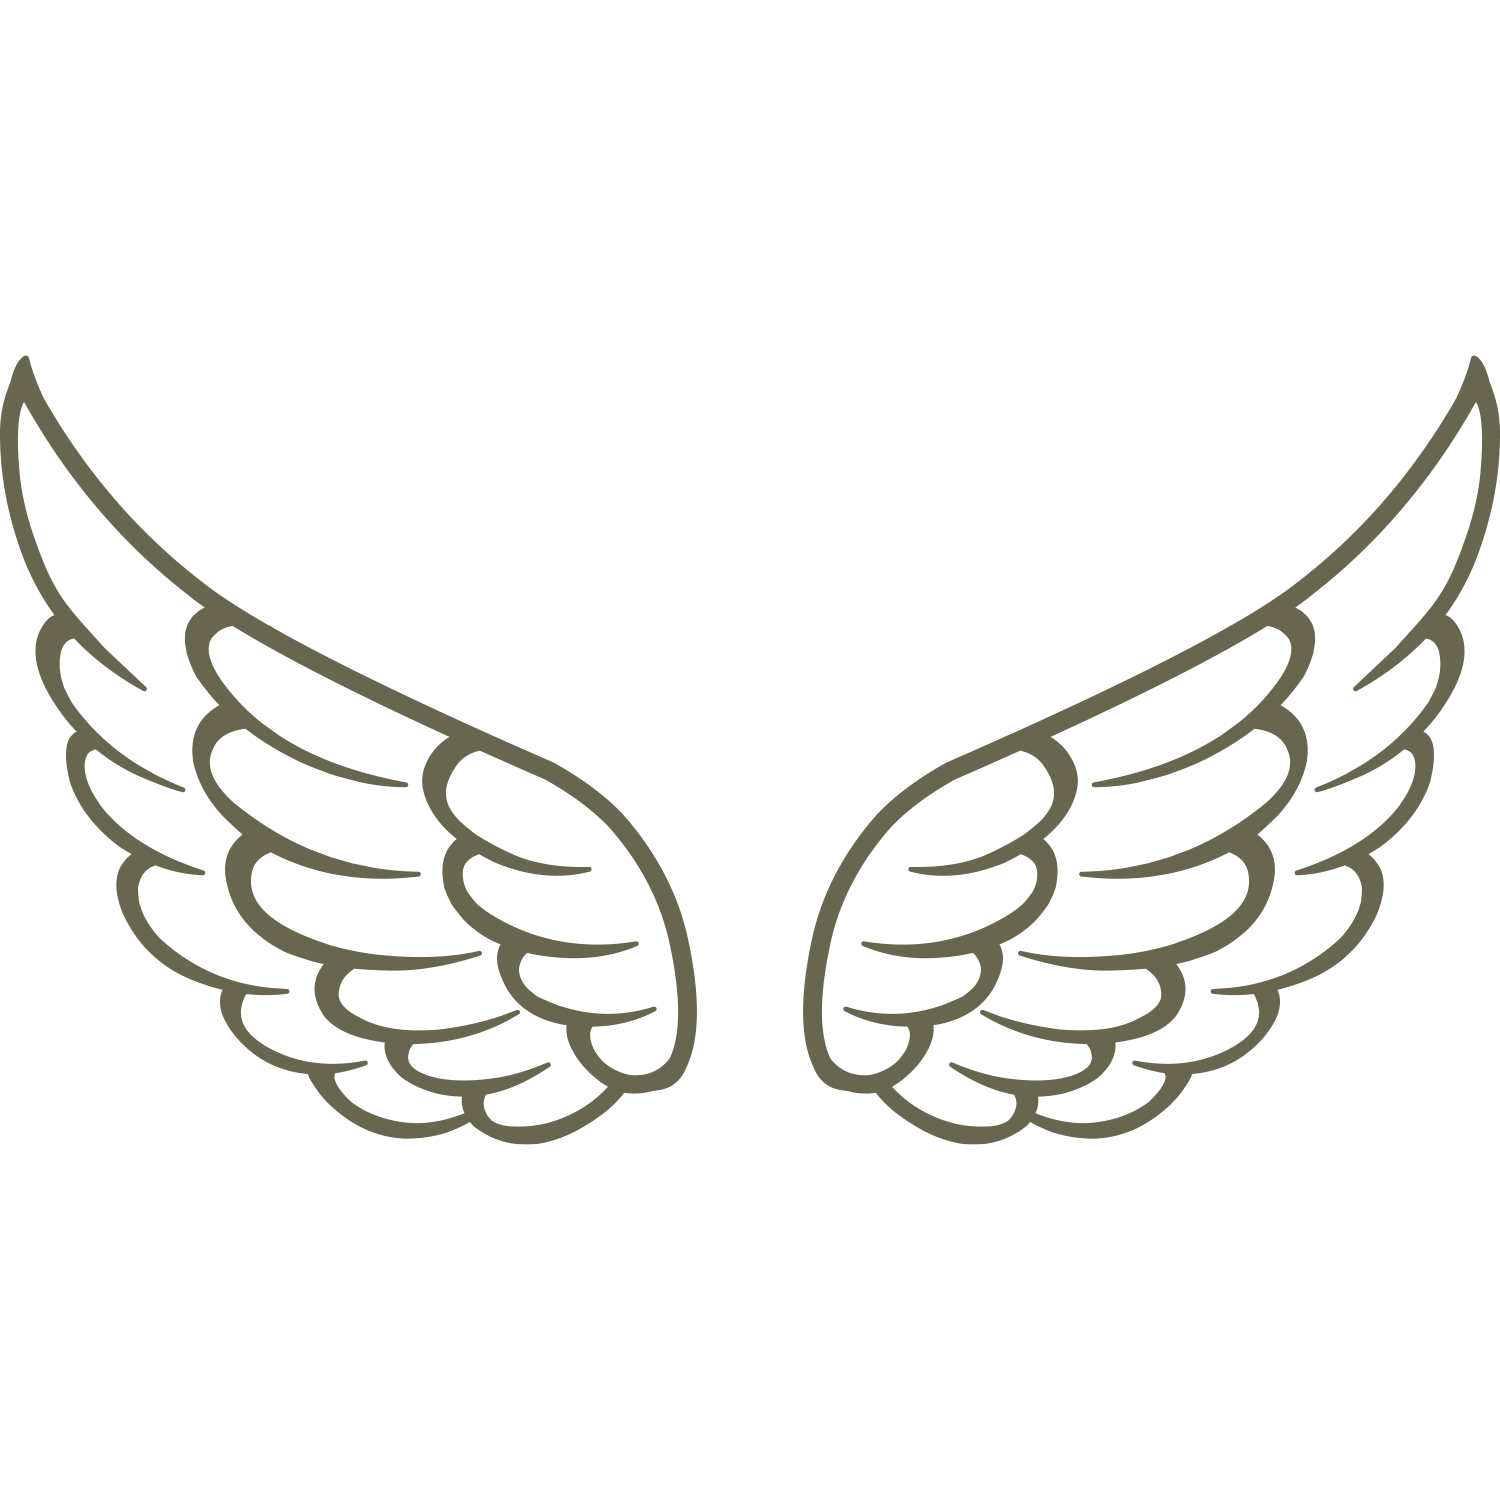 Wings Delrin Leather Stamp